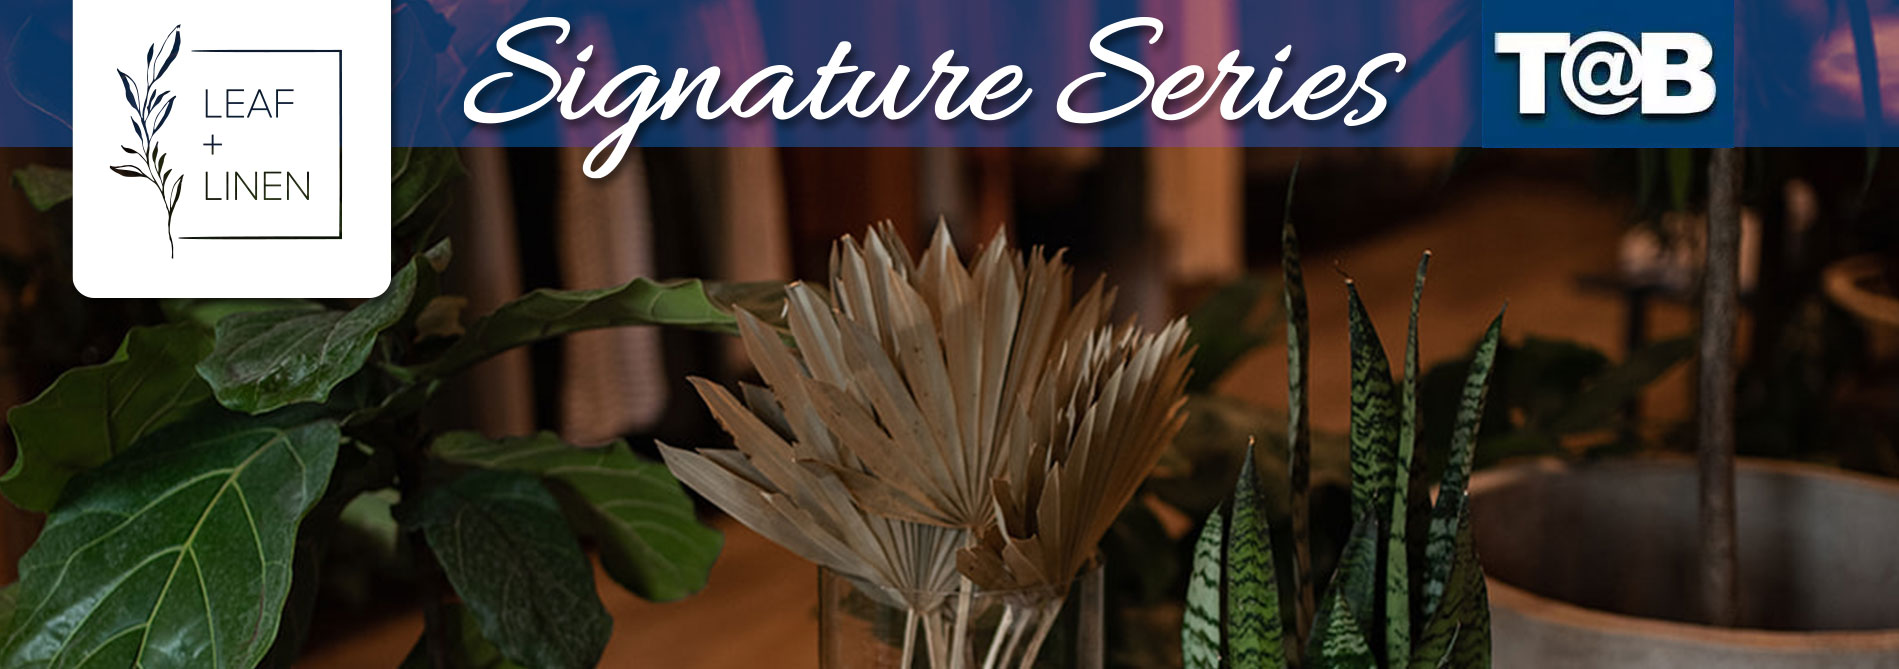 Signature Series TAB Specifications